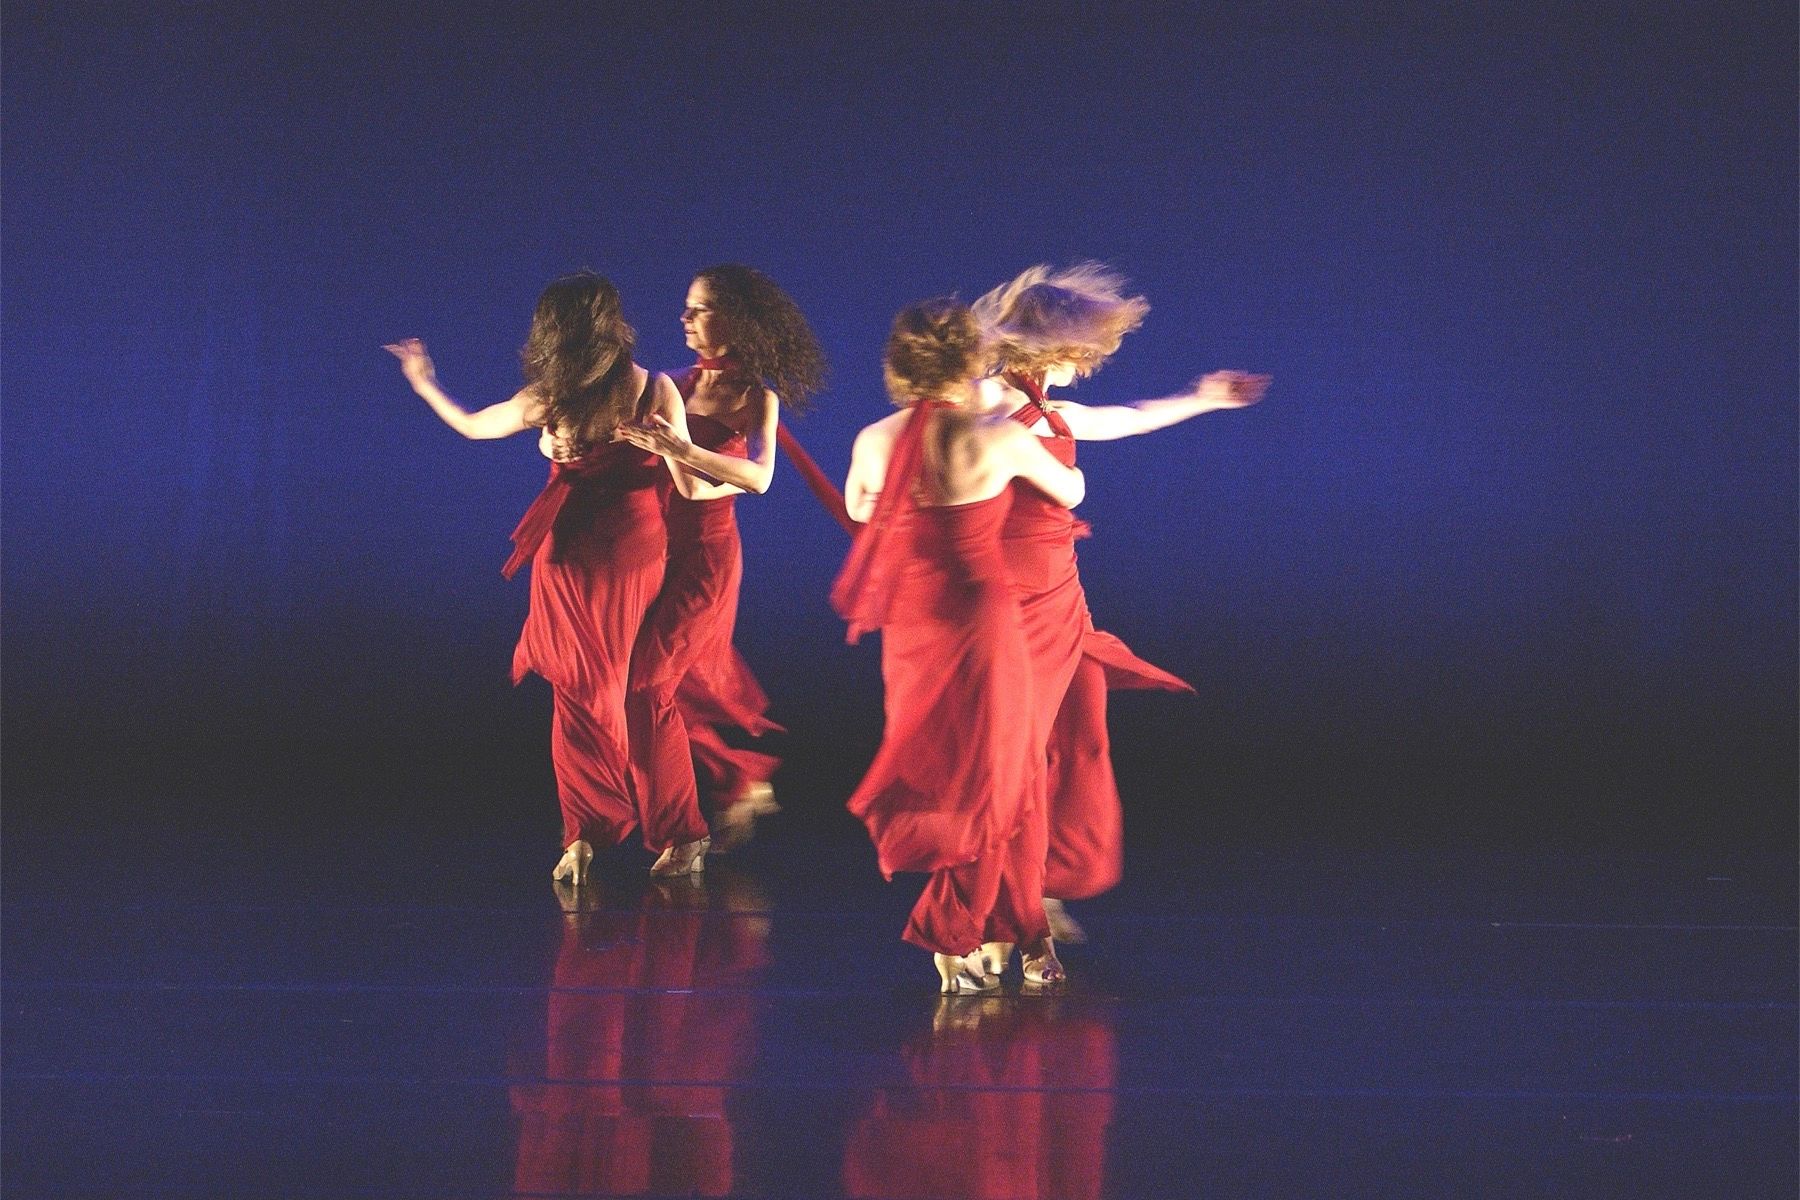 Four Tango Confusion dancers are dancing in red floating garments in front of a dark blue dreamy bac